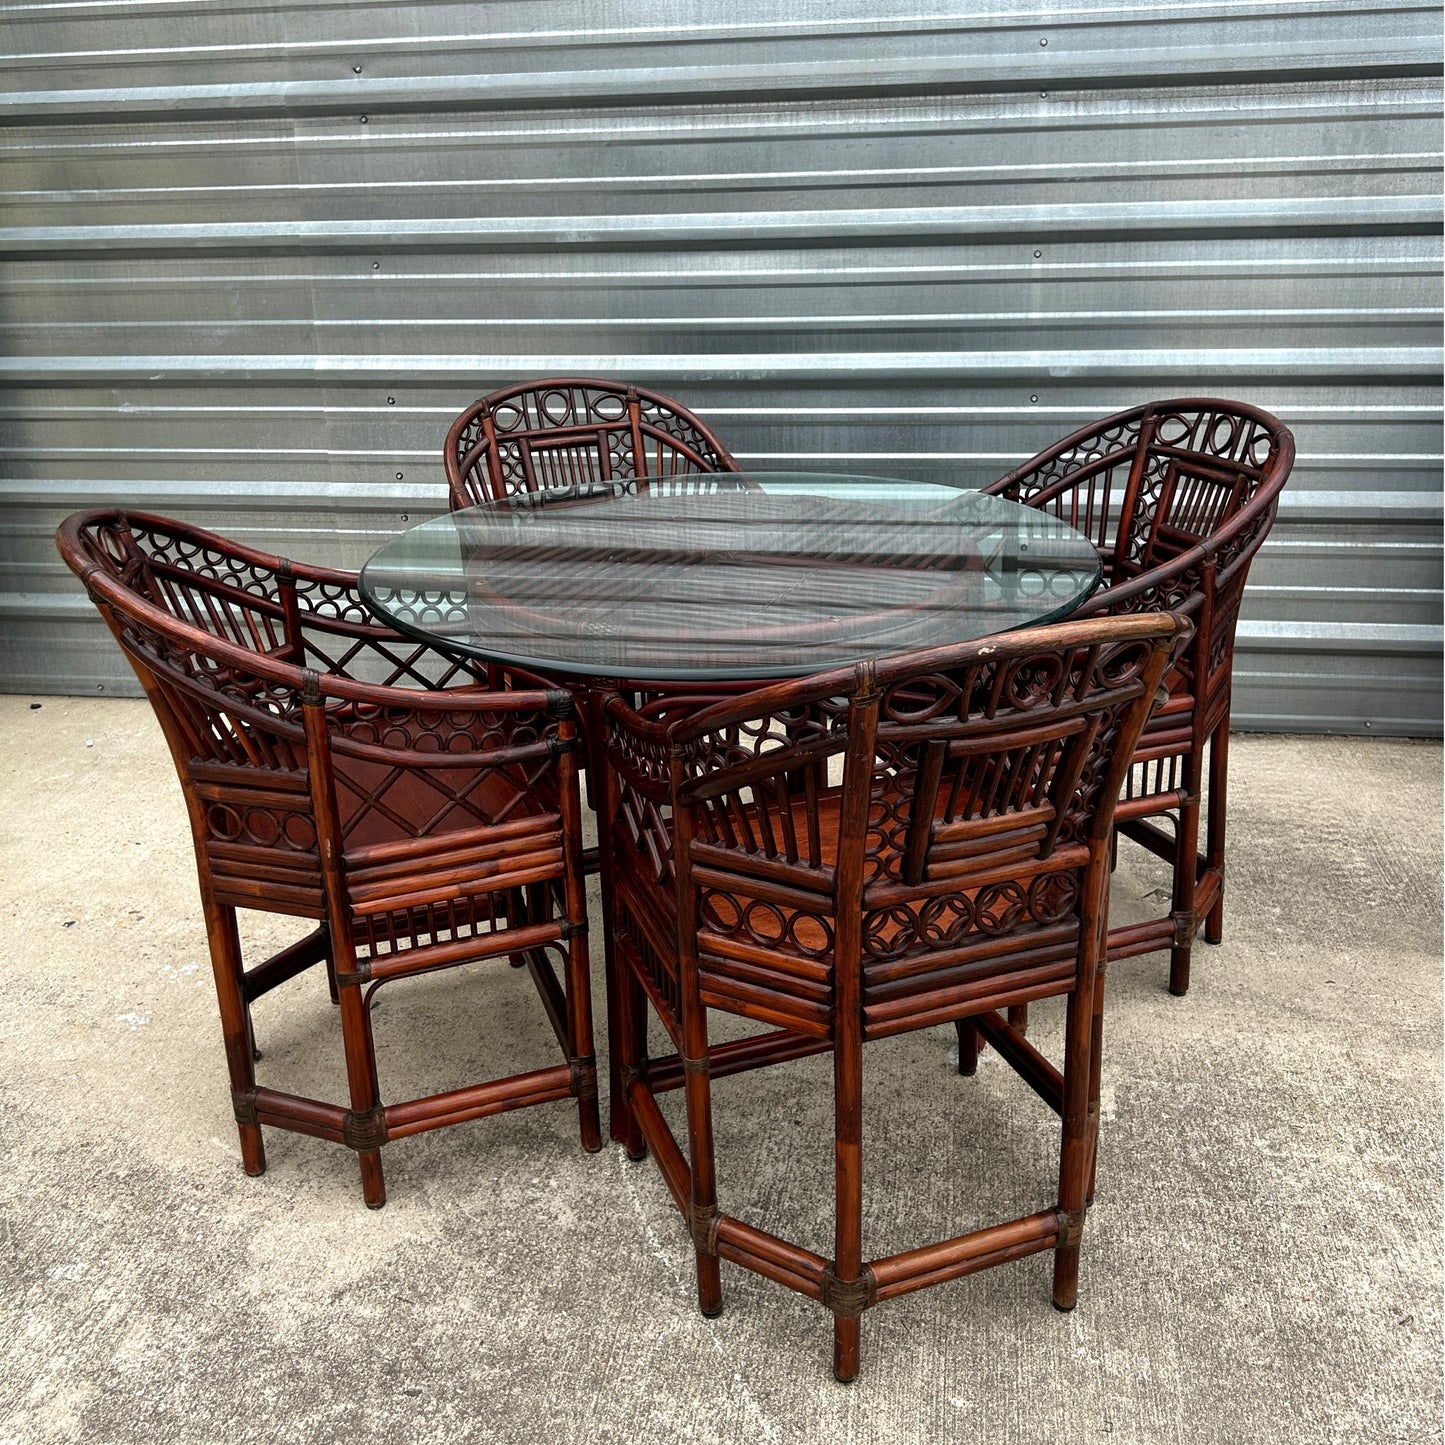 Vintage Bamboo Table W/Glass Top And Chairs